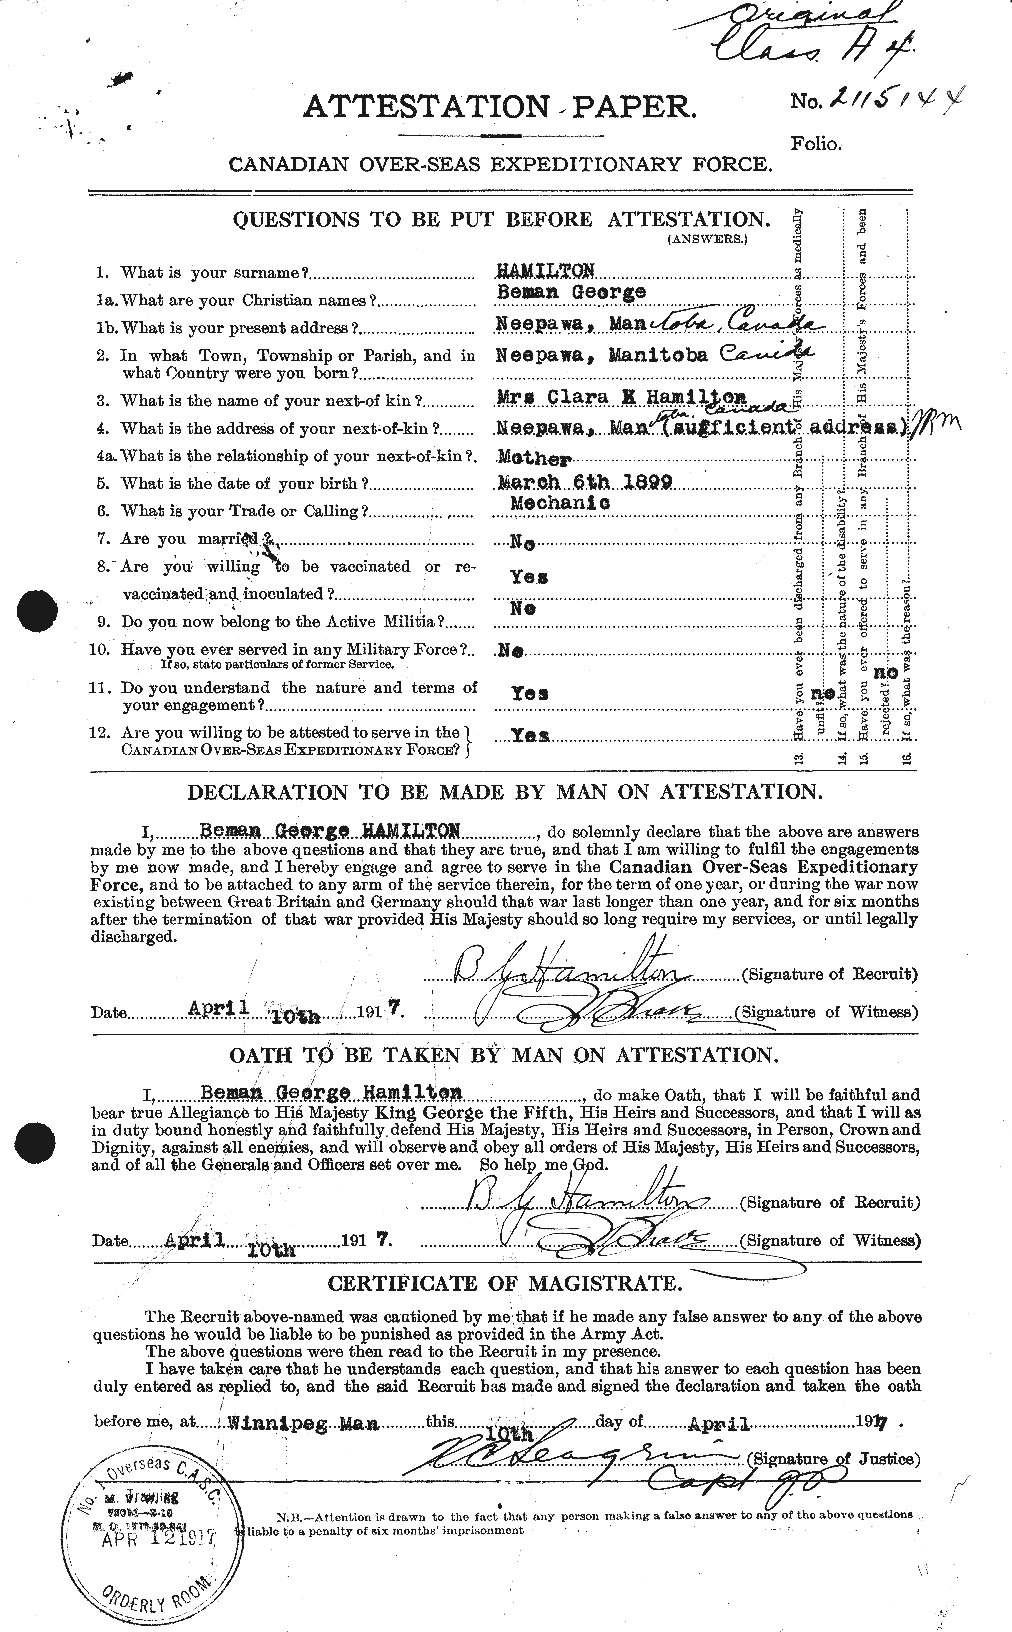 Personnel Records of the First World War - CEF 375265a